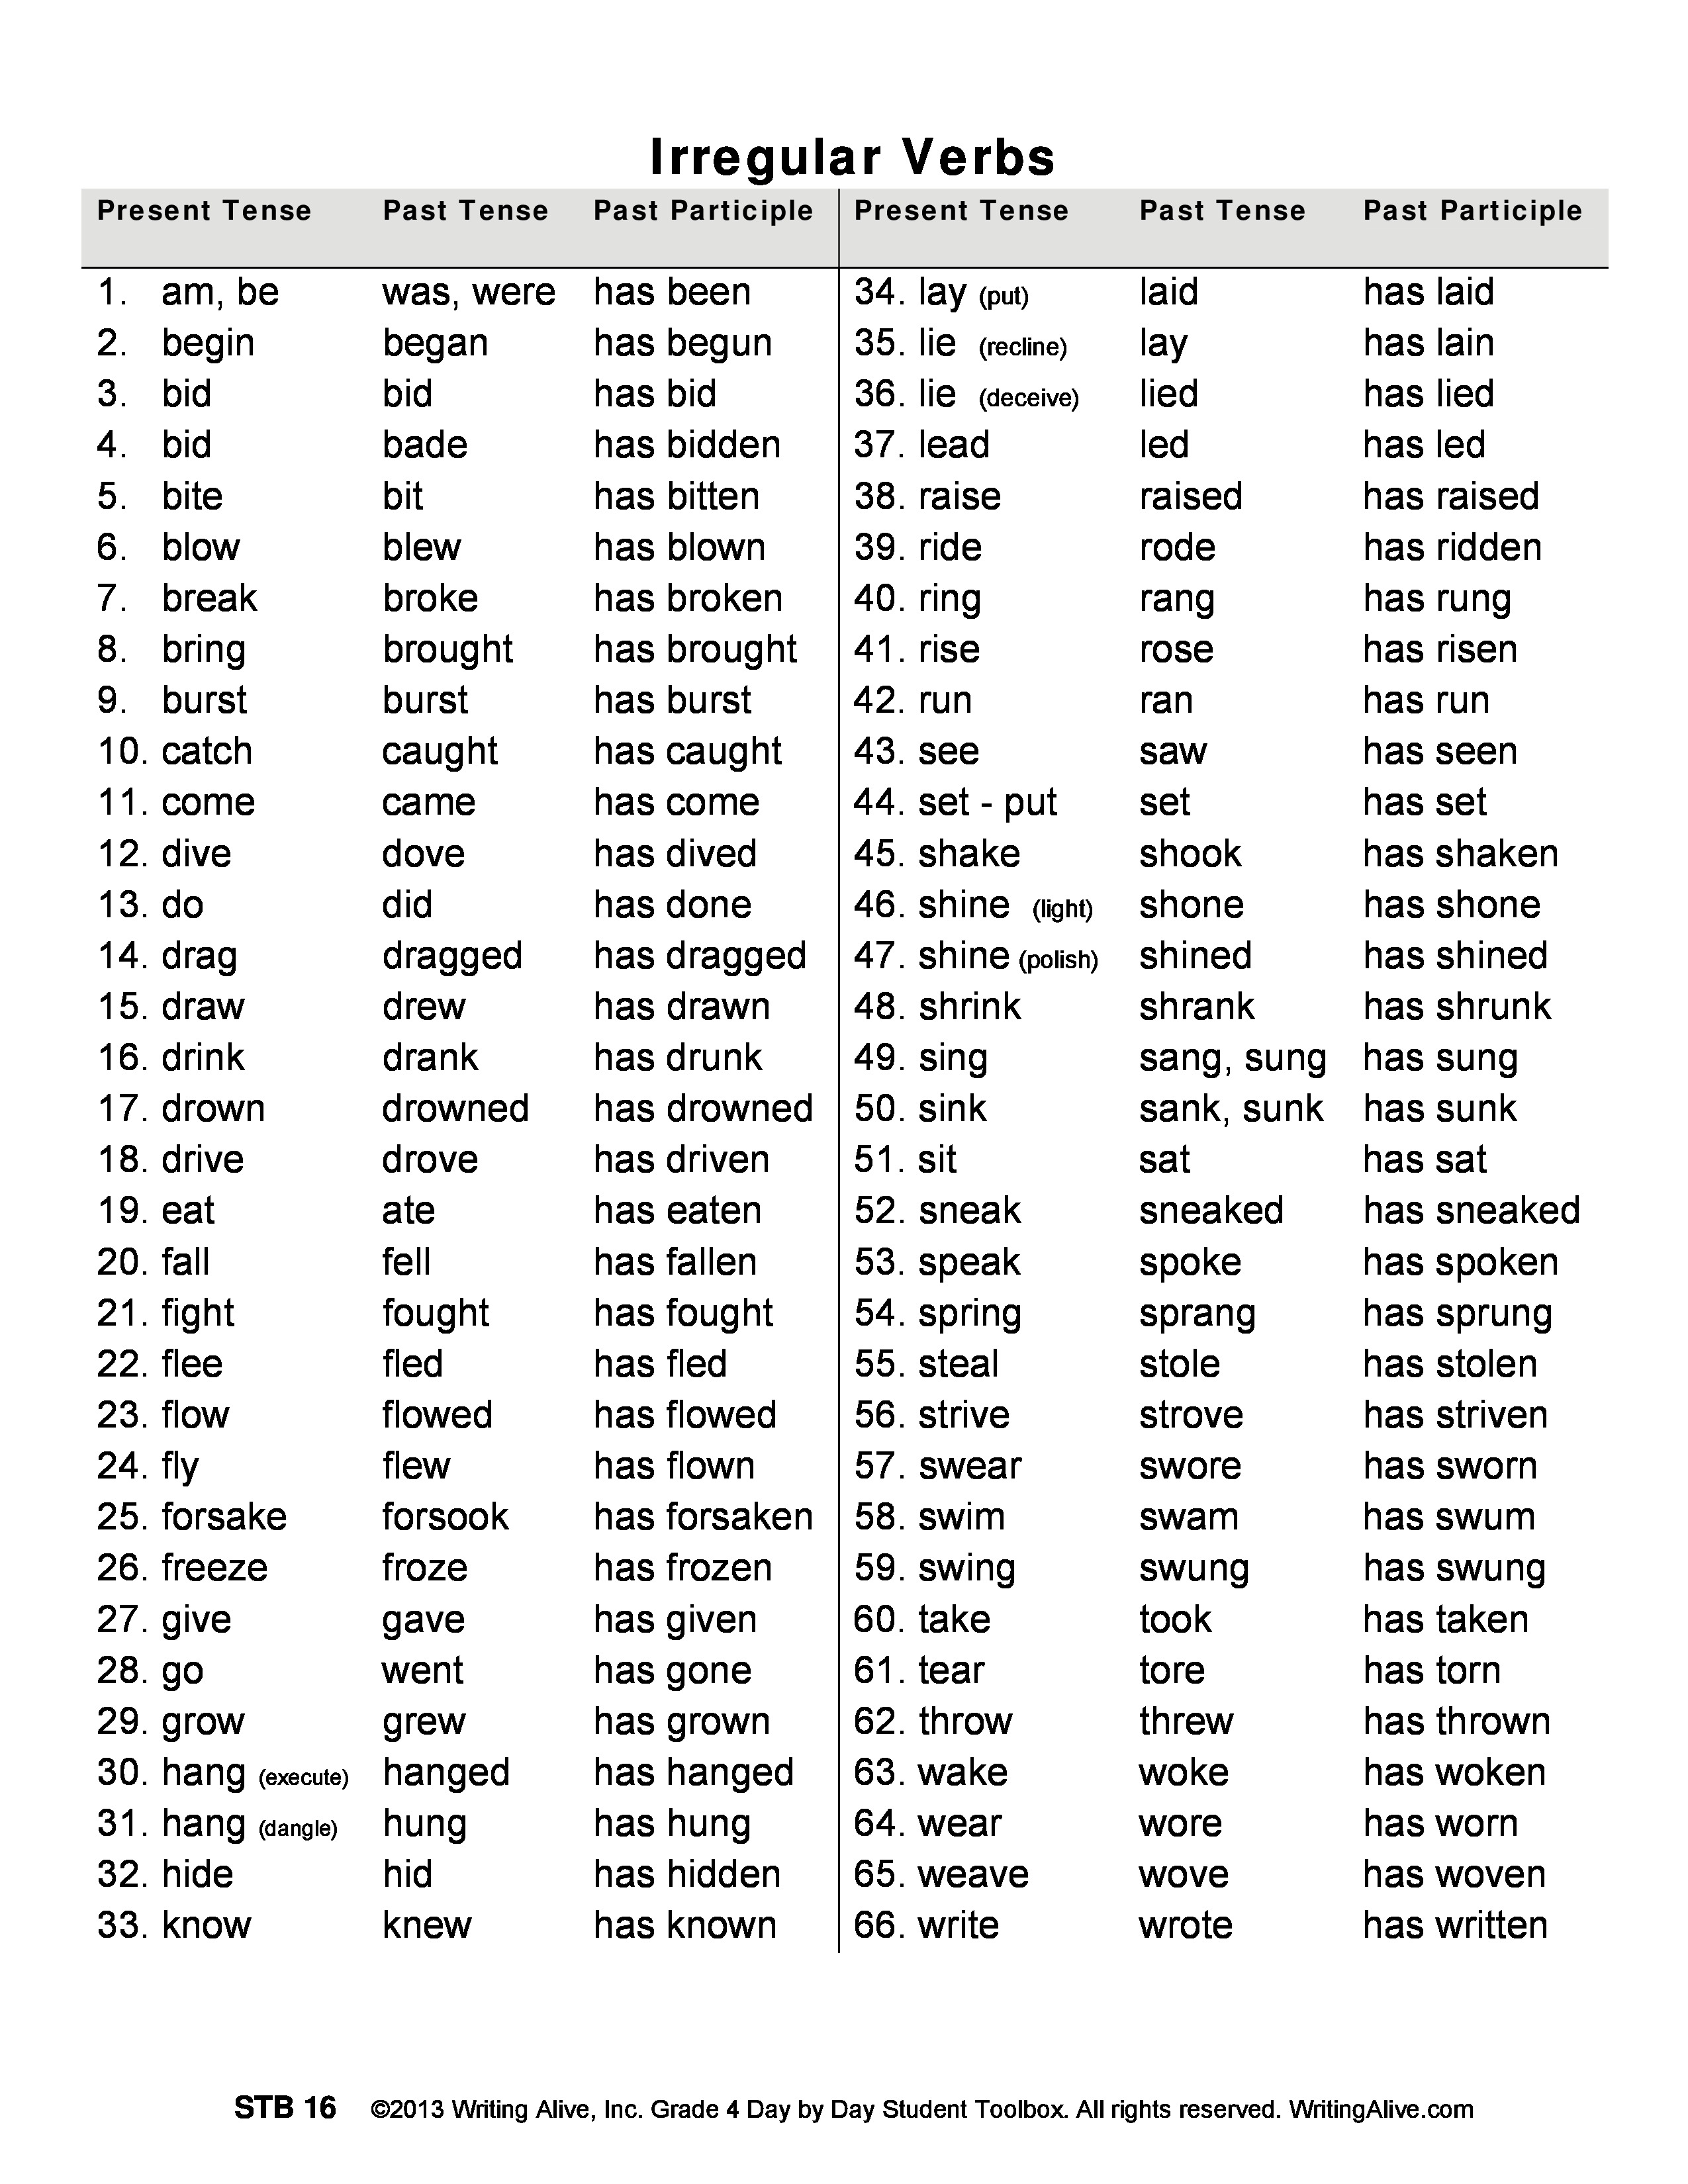 19-best-images-of-spanish-subject-verb-agreement-worksheets-subject-verb-agreement-worksheets